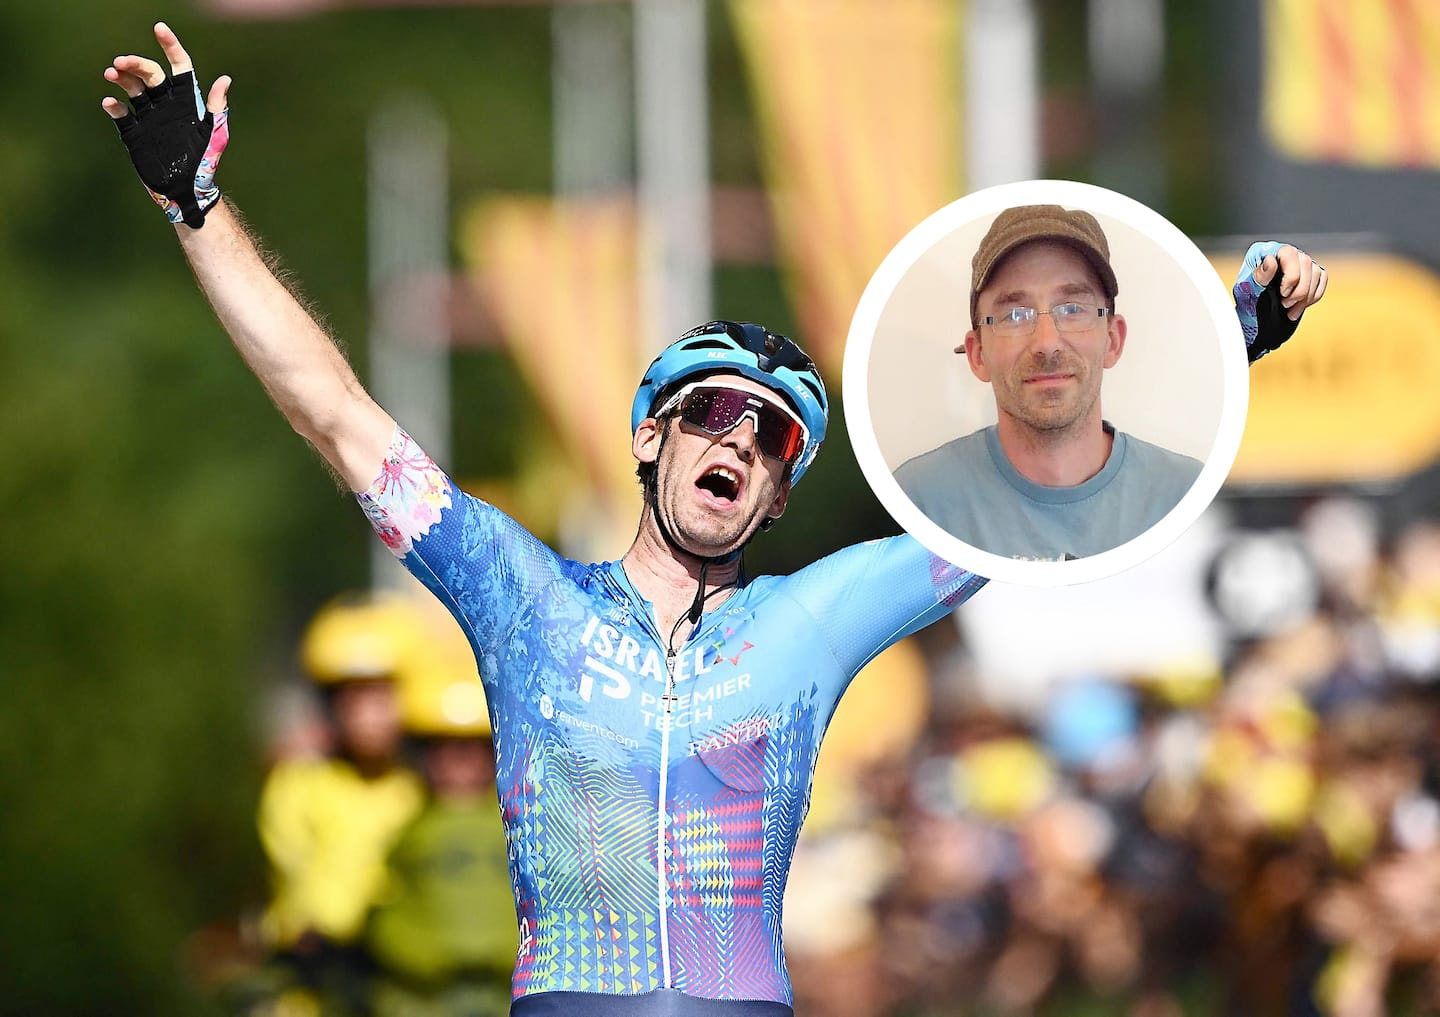 Hugo Houle at the Tour de France: great brotherly pride